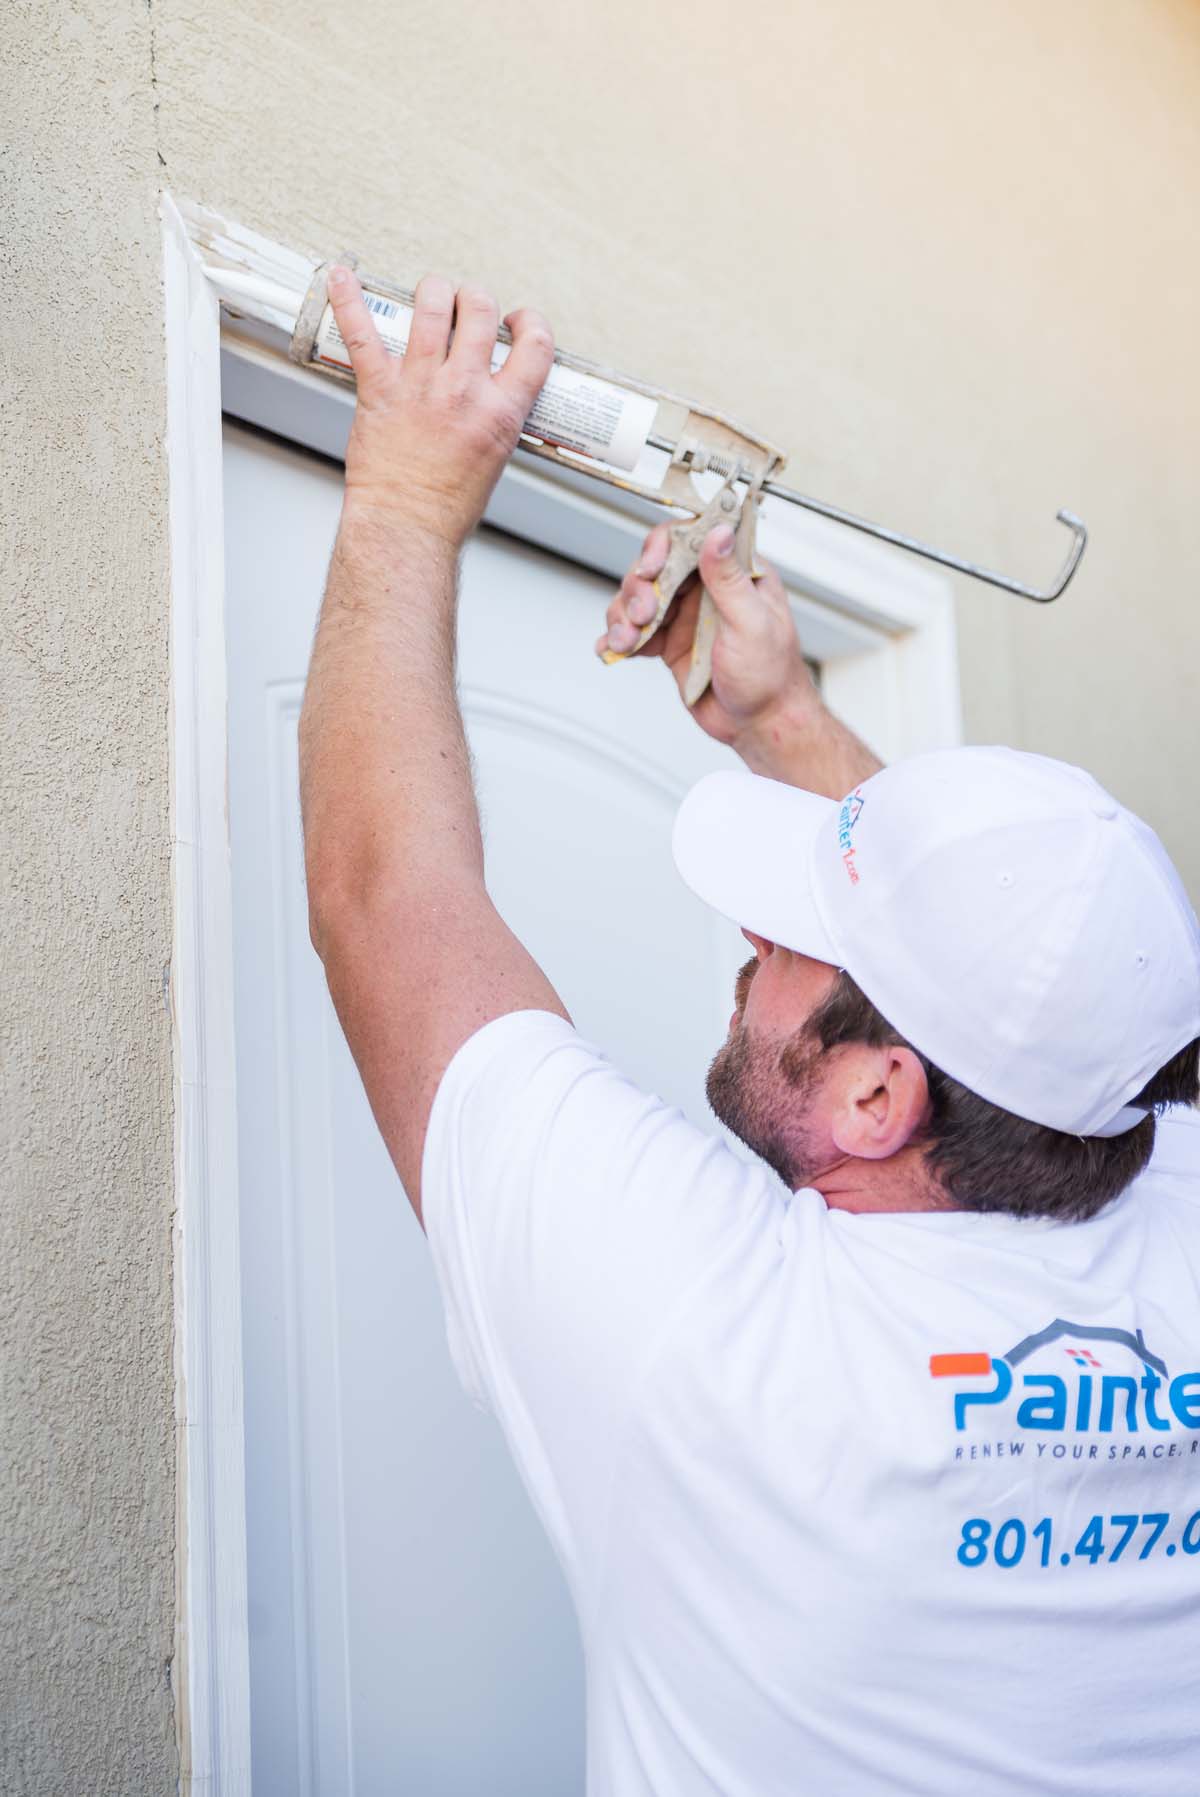 This professional at Painter1 takes care of the detailing around a door - contact us for the precise services your business needs.